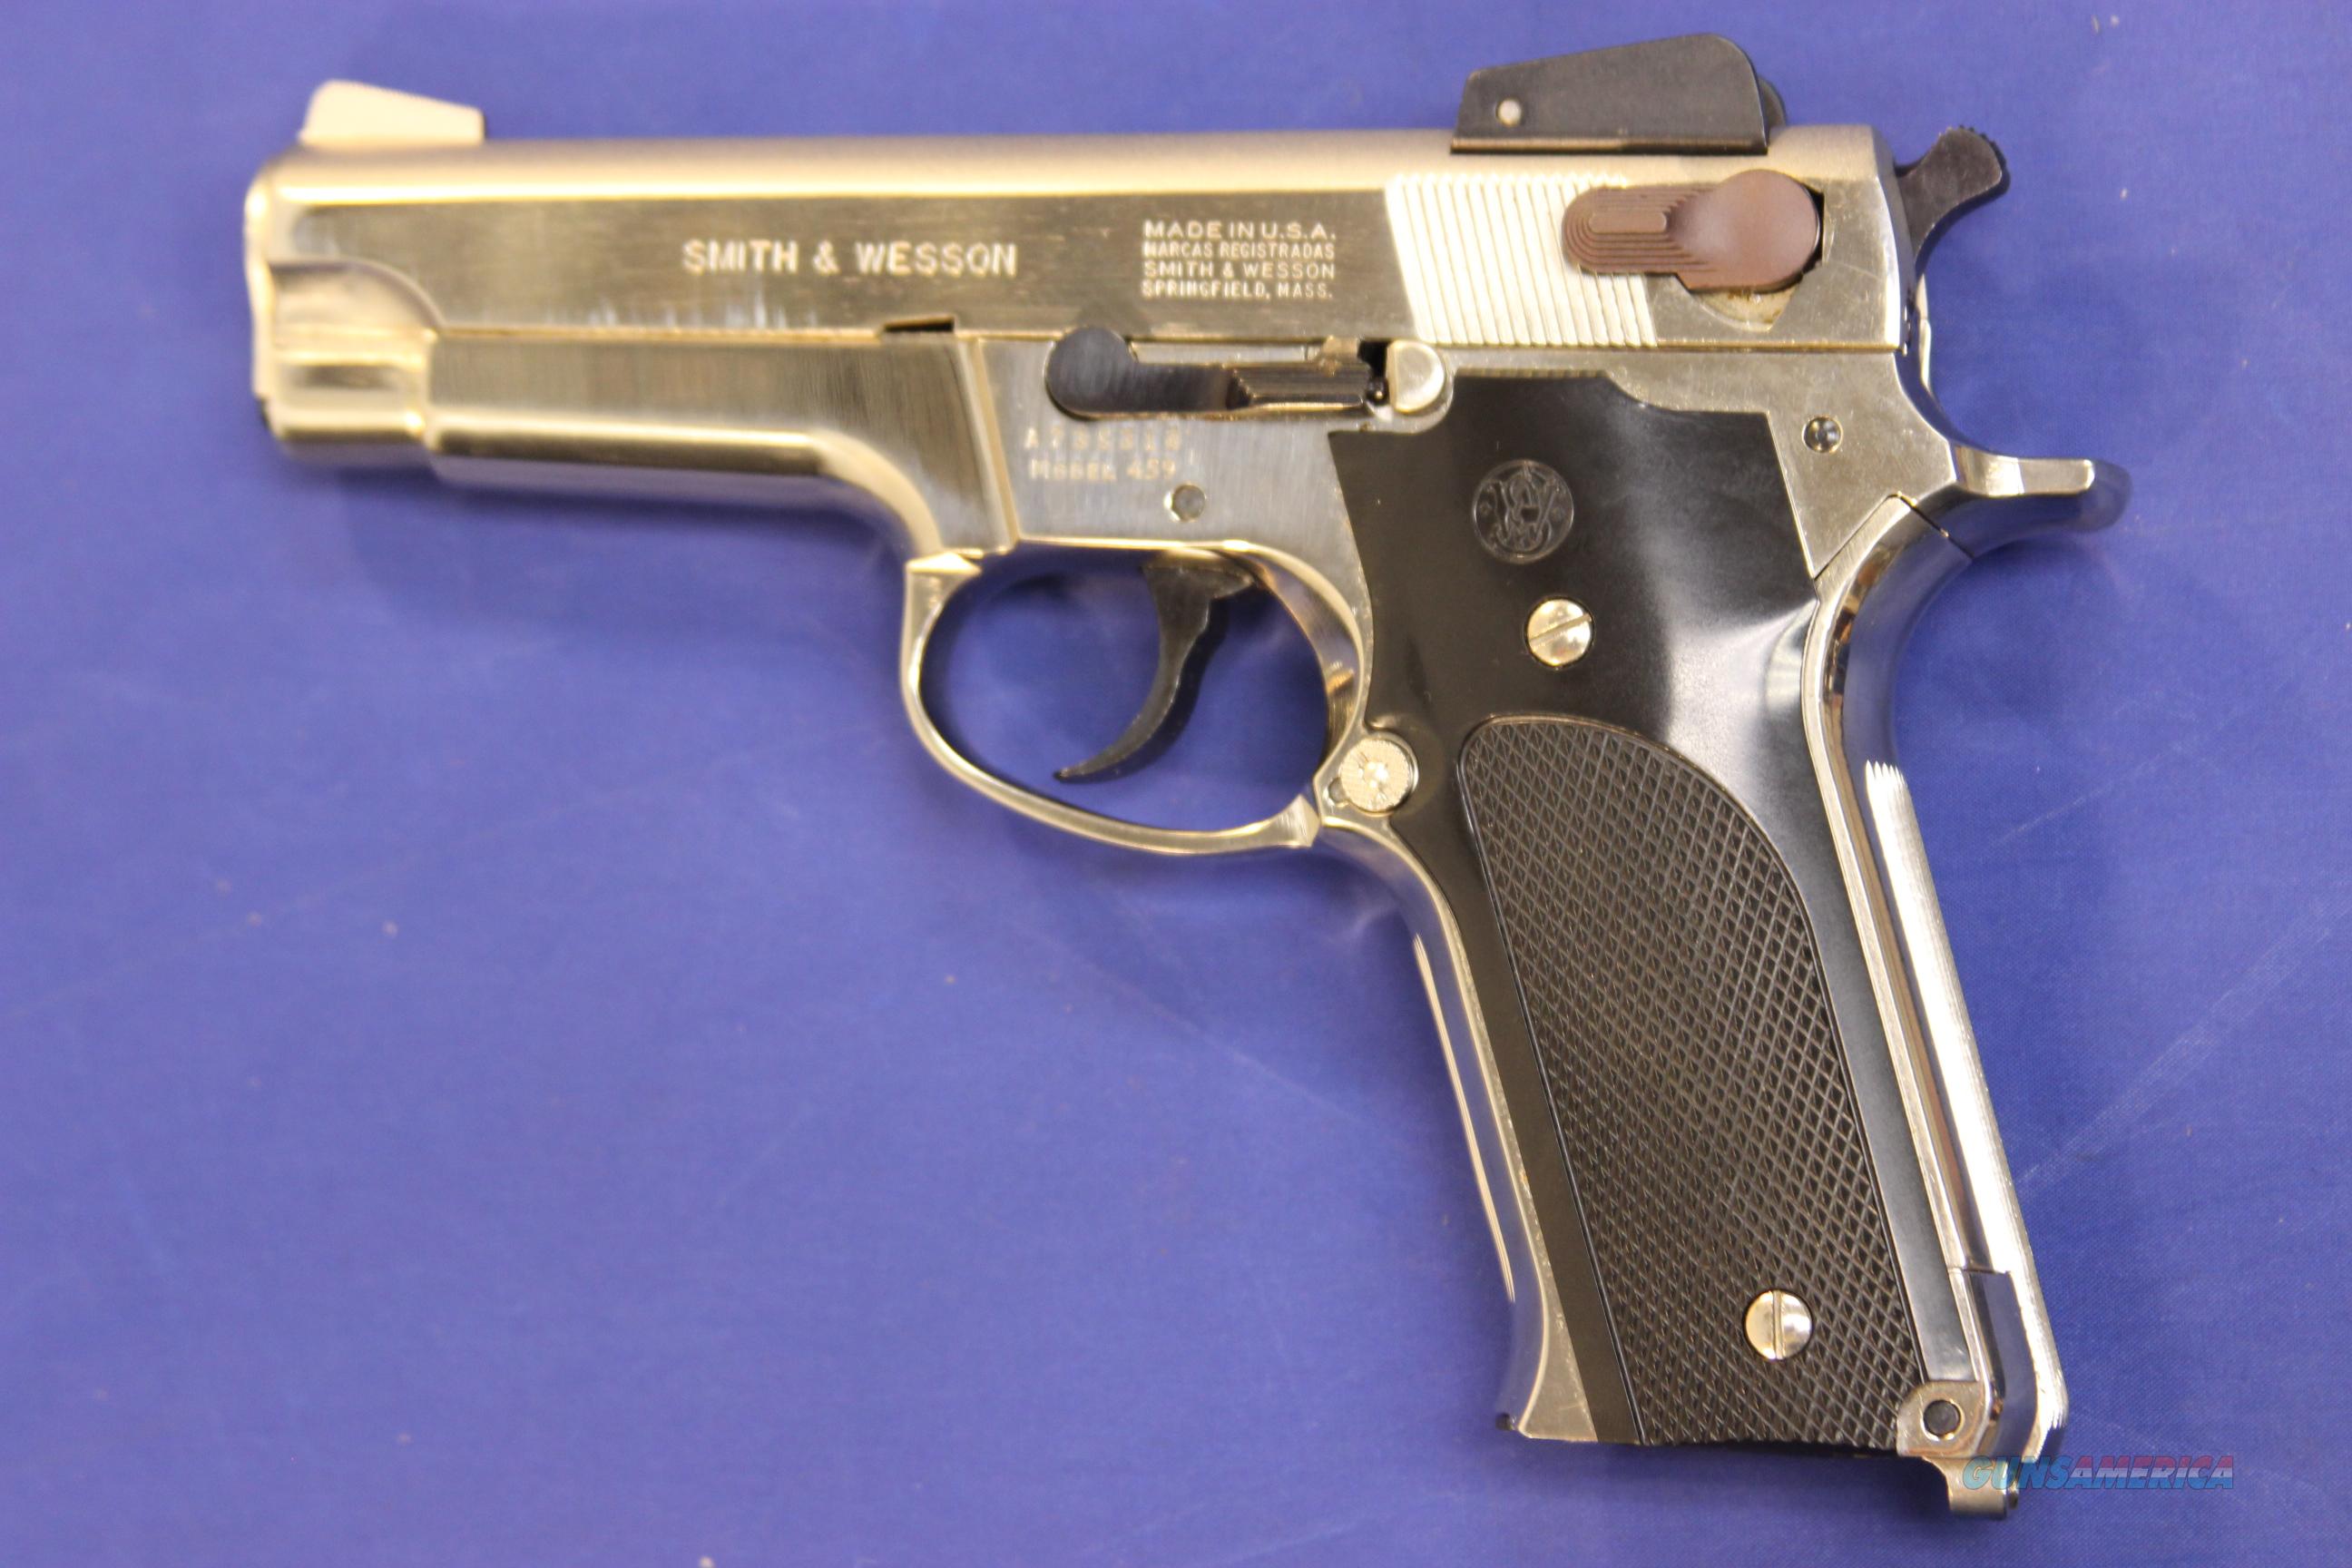 smith-wesson-model-459-9mm-for-sale-at-gunsamerica-943445870